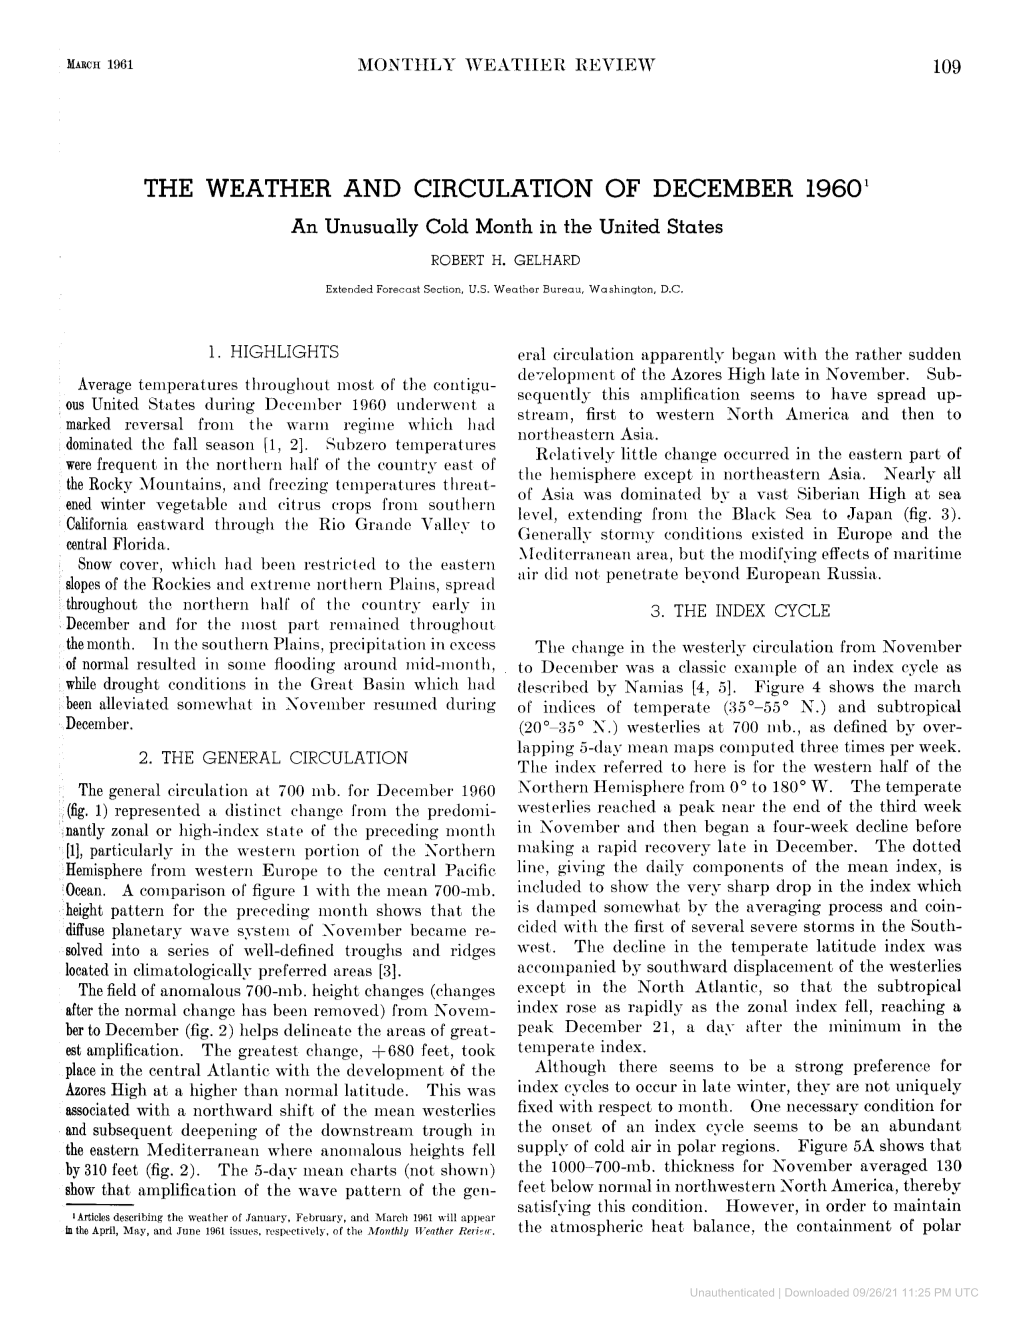 The Weather and Circulation of December 1960'